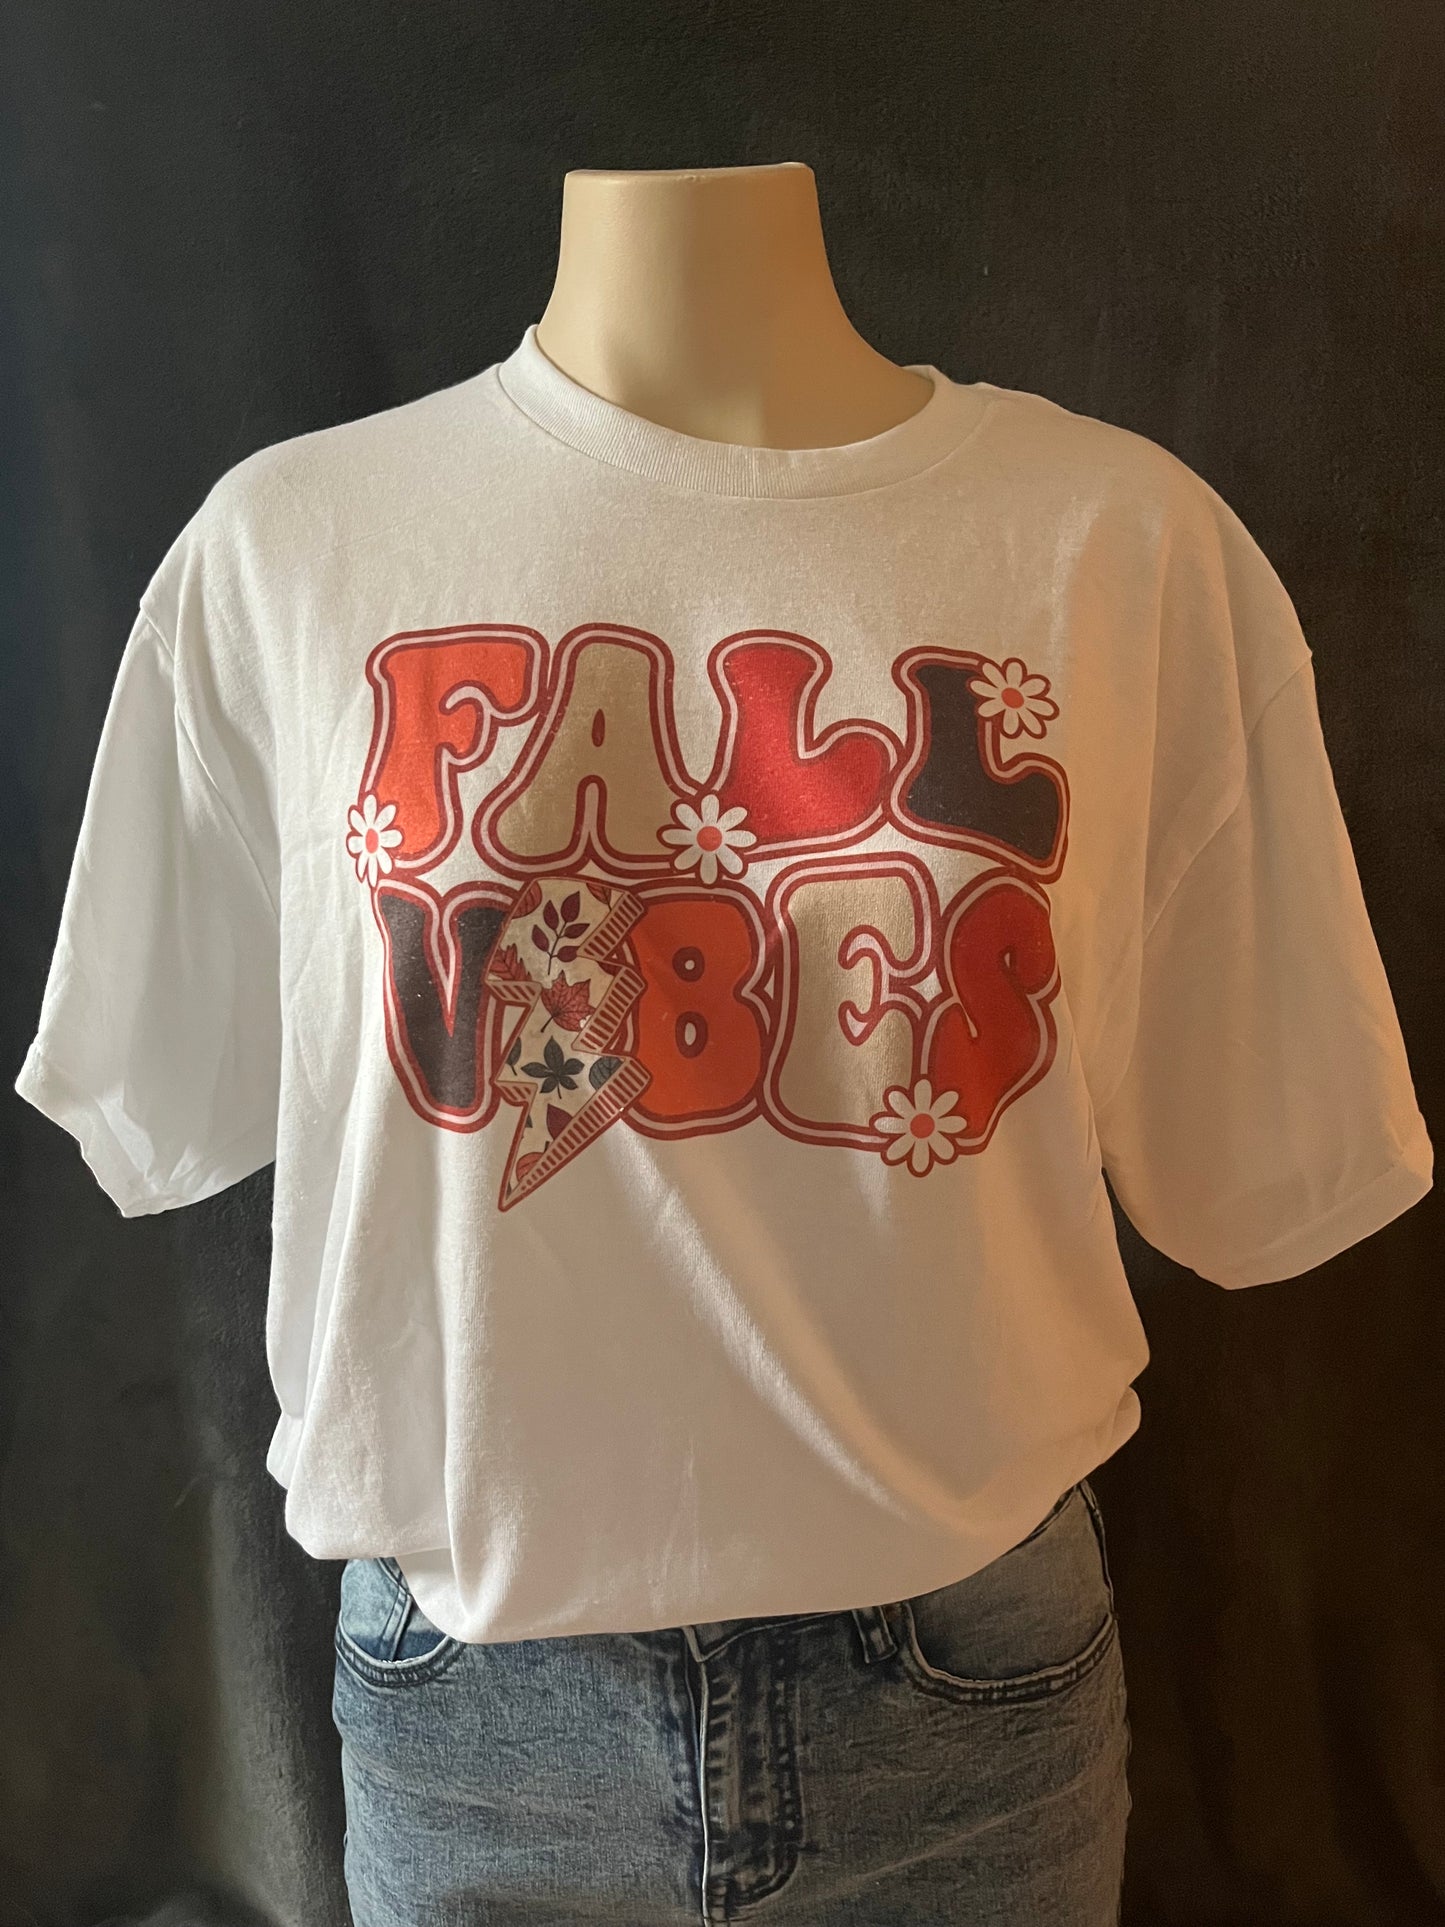 Fall Vibes Graphic T-shirt